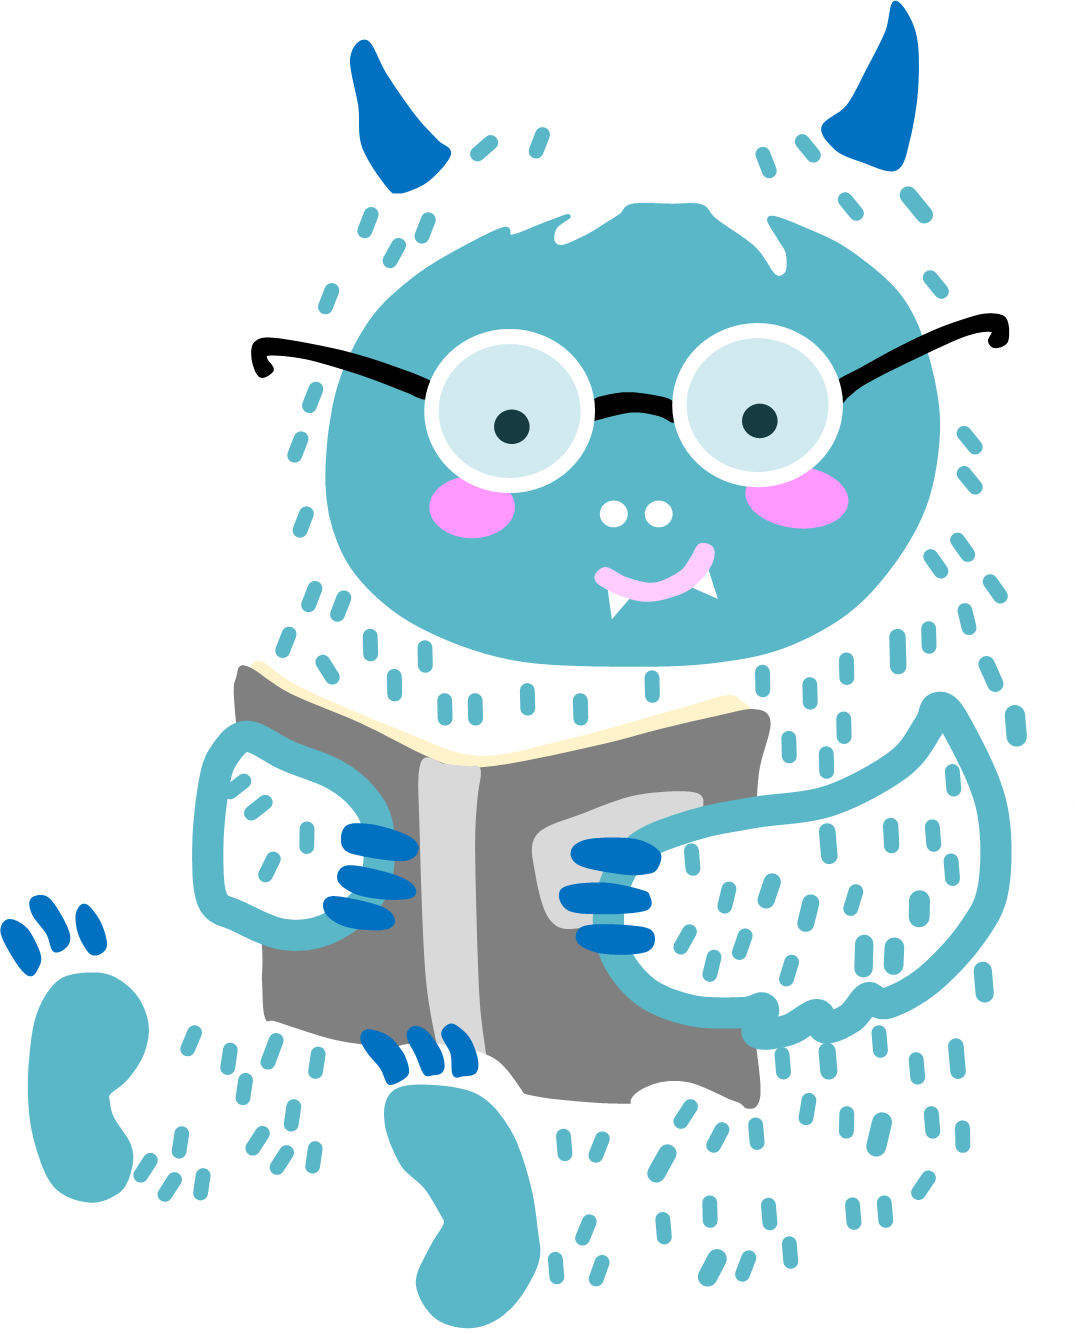 Illustration of a monster/yeti wearing glasses holding a book in his lap.